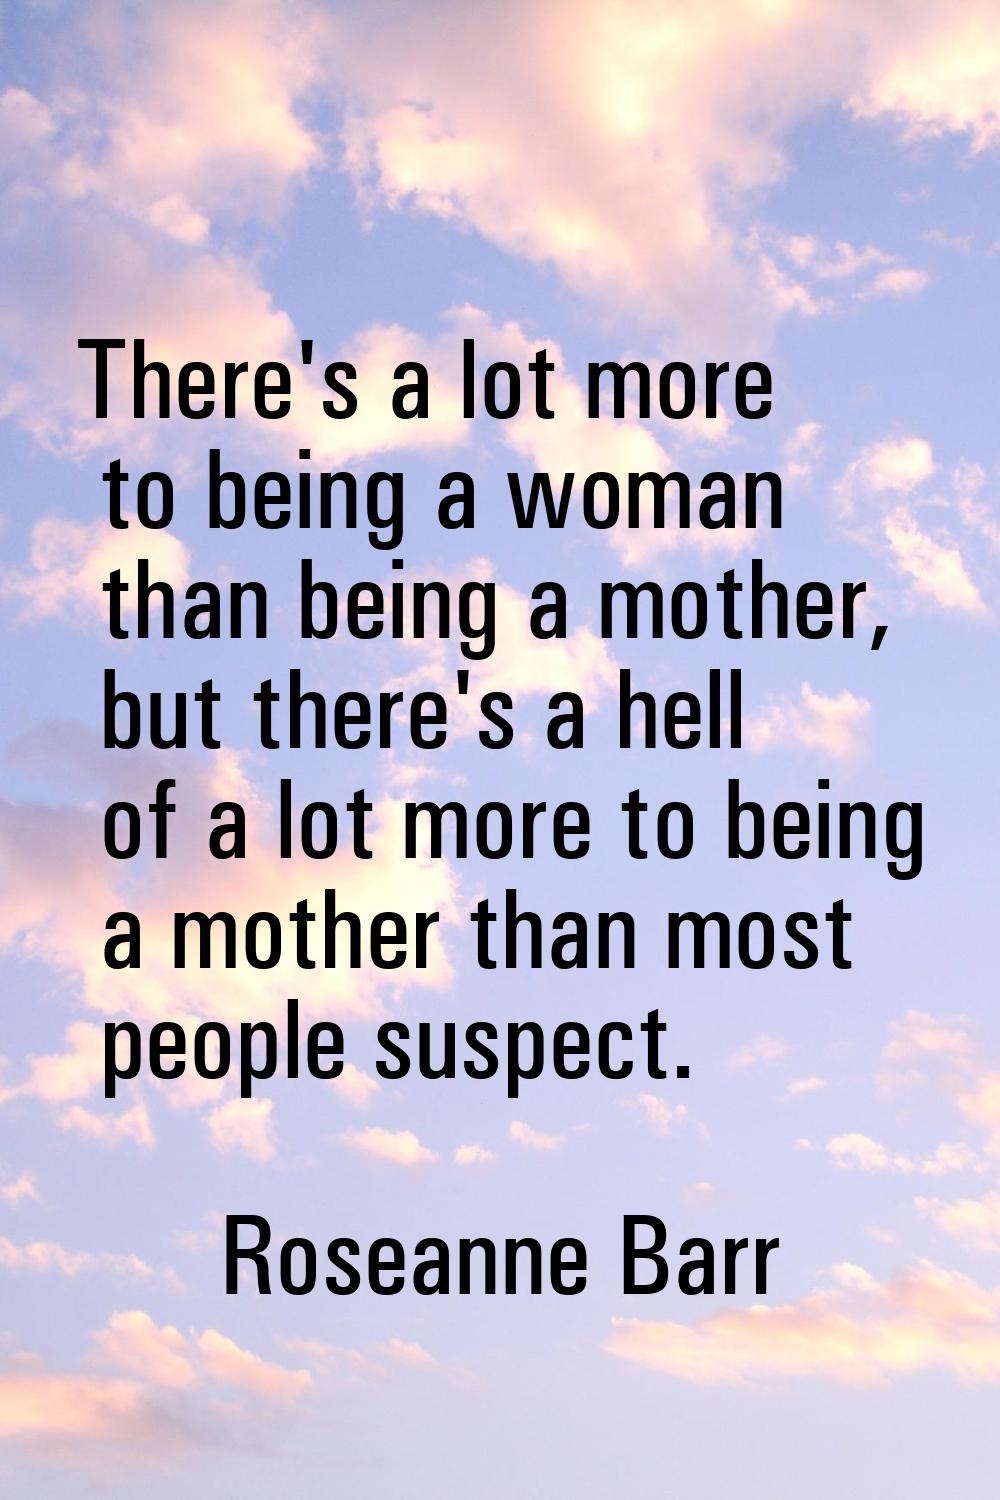 There's a lot more to being a woman than being a mother, but there's a hell of a lot more to being 